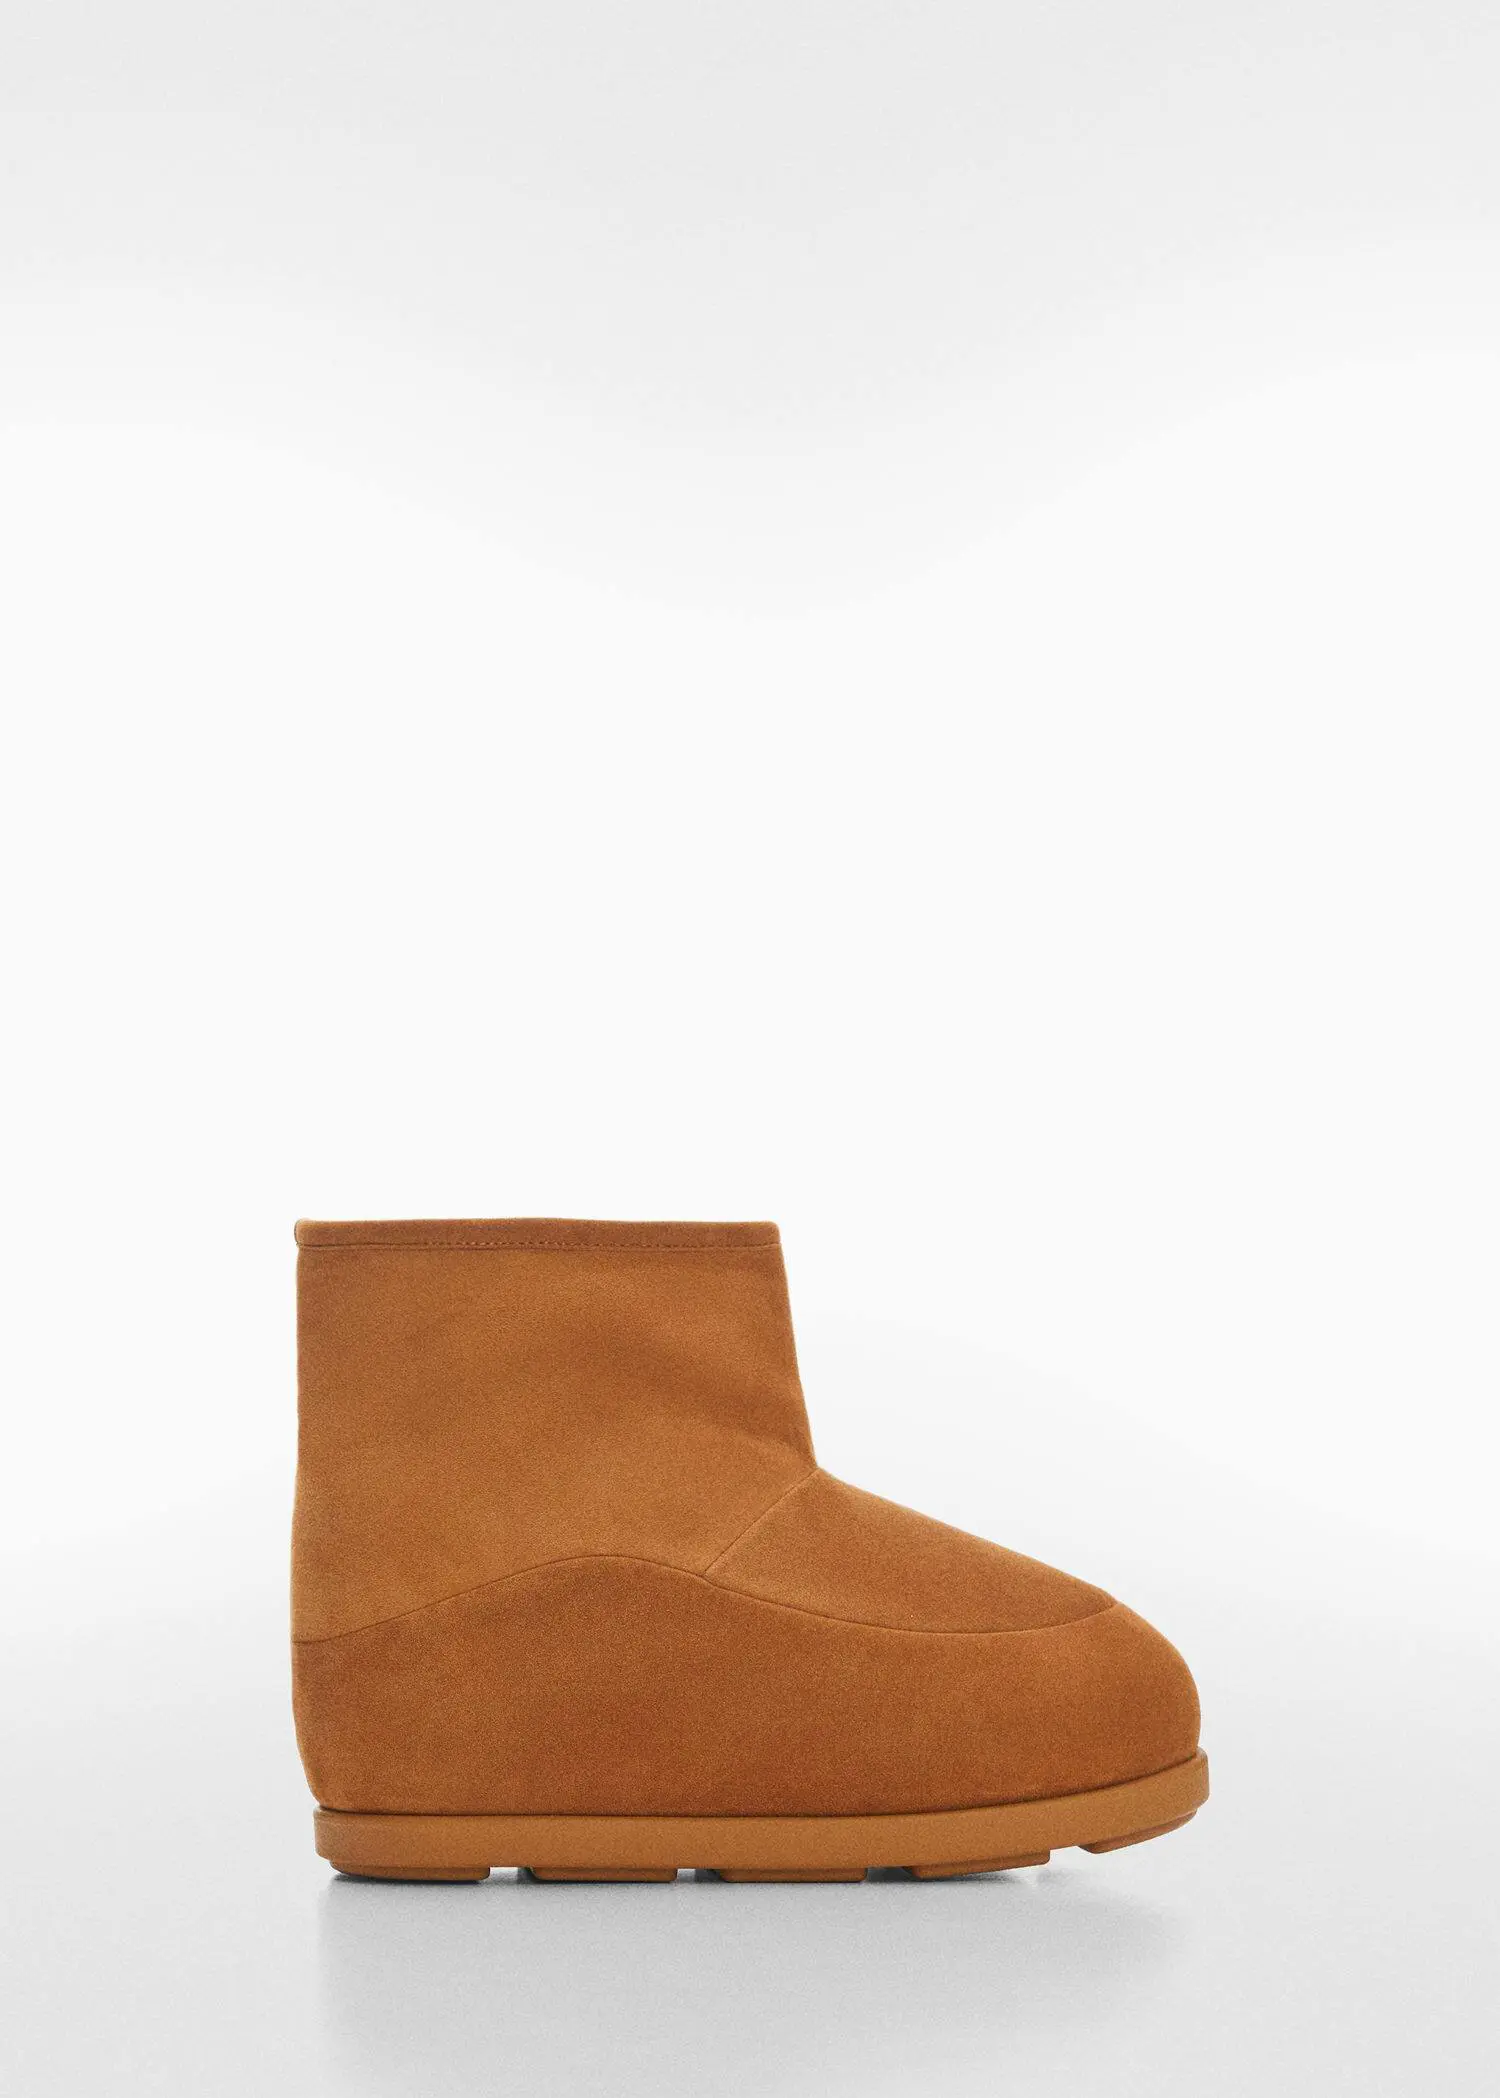 Mango Fur-effect suede ankle boots. 2